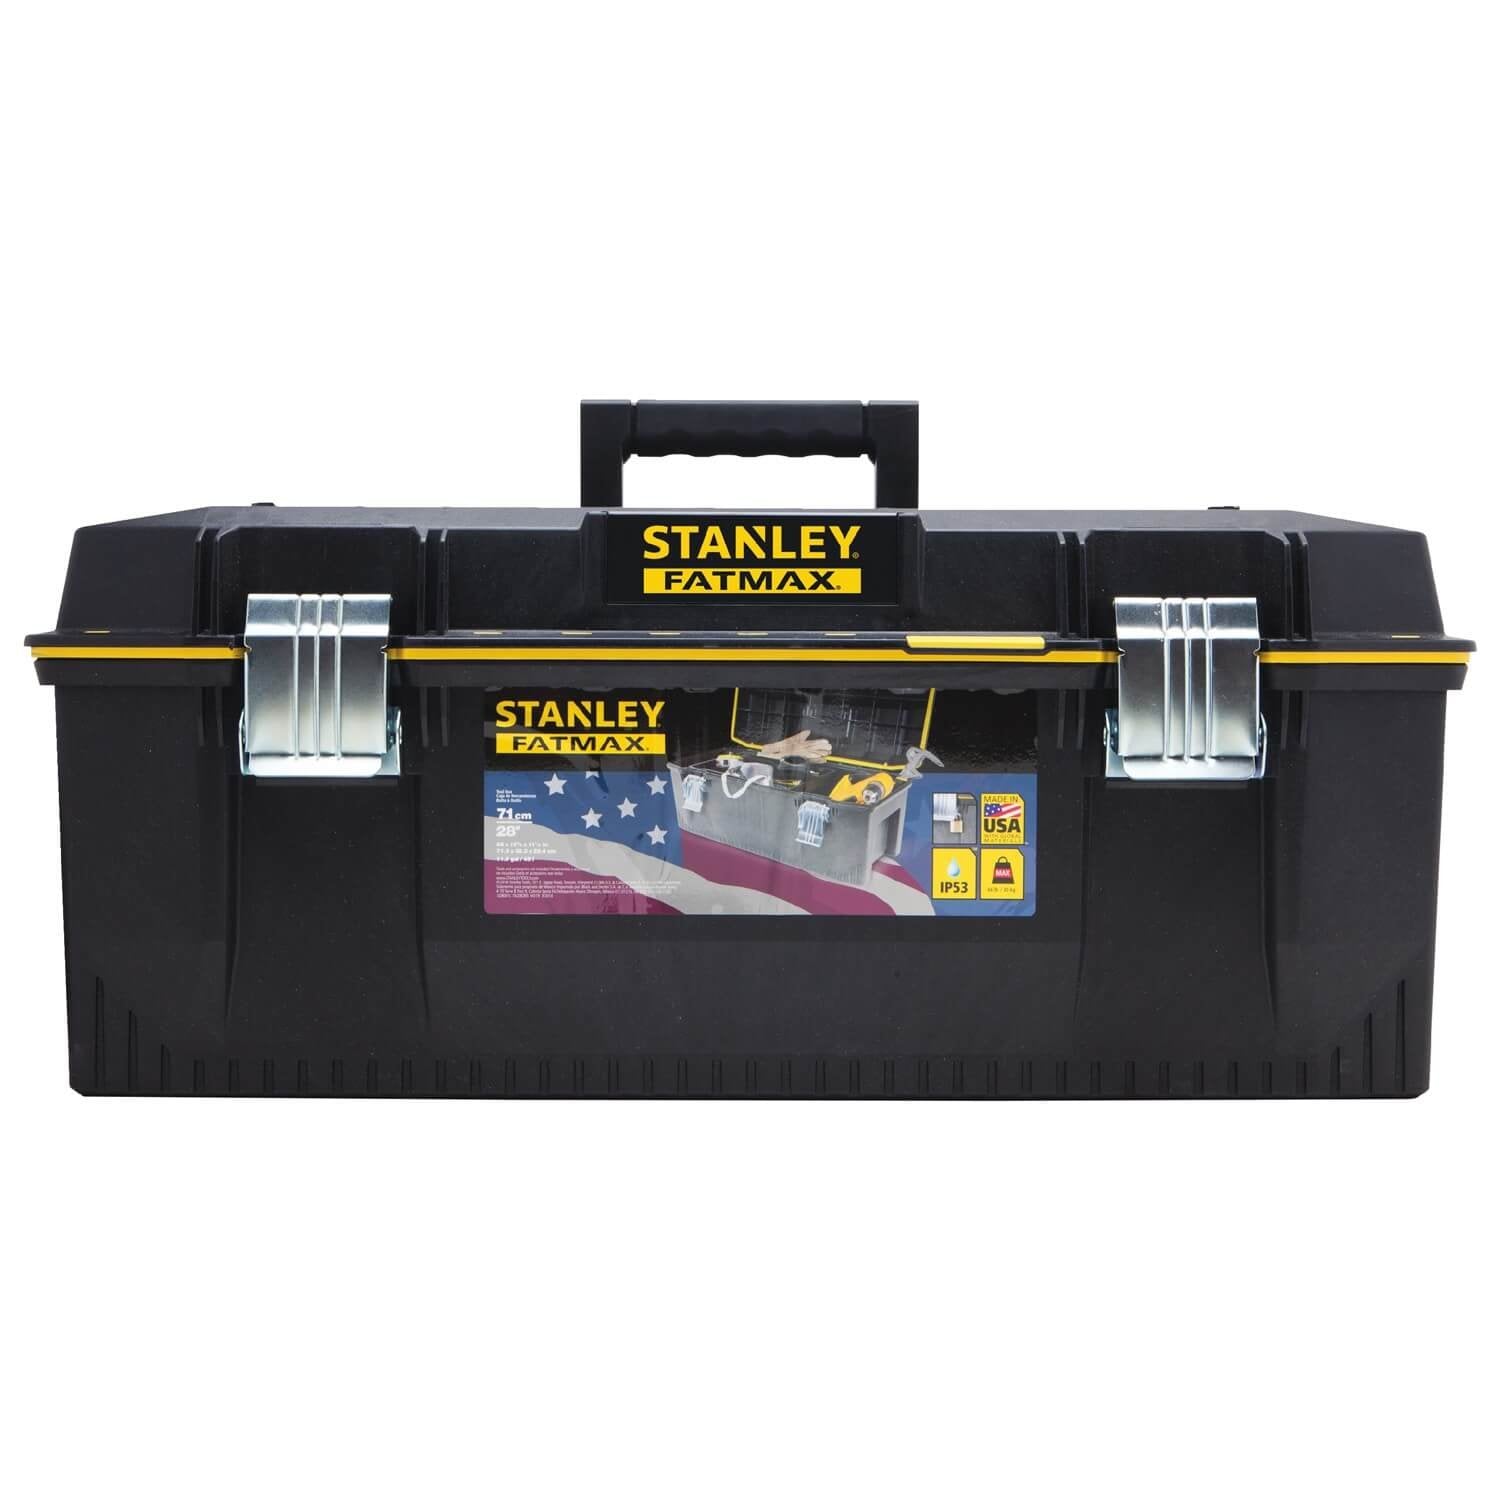 STANLEY 028001L 28-Inch Structural Foam Toolbox